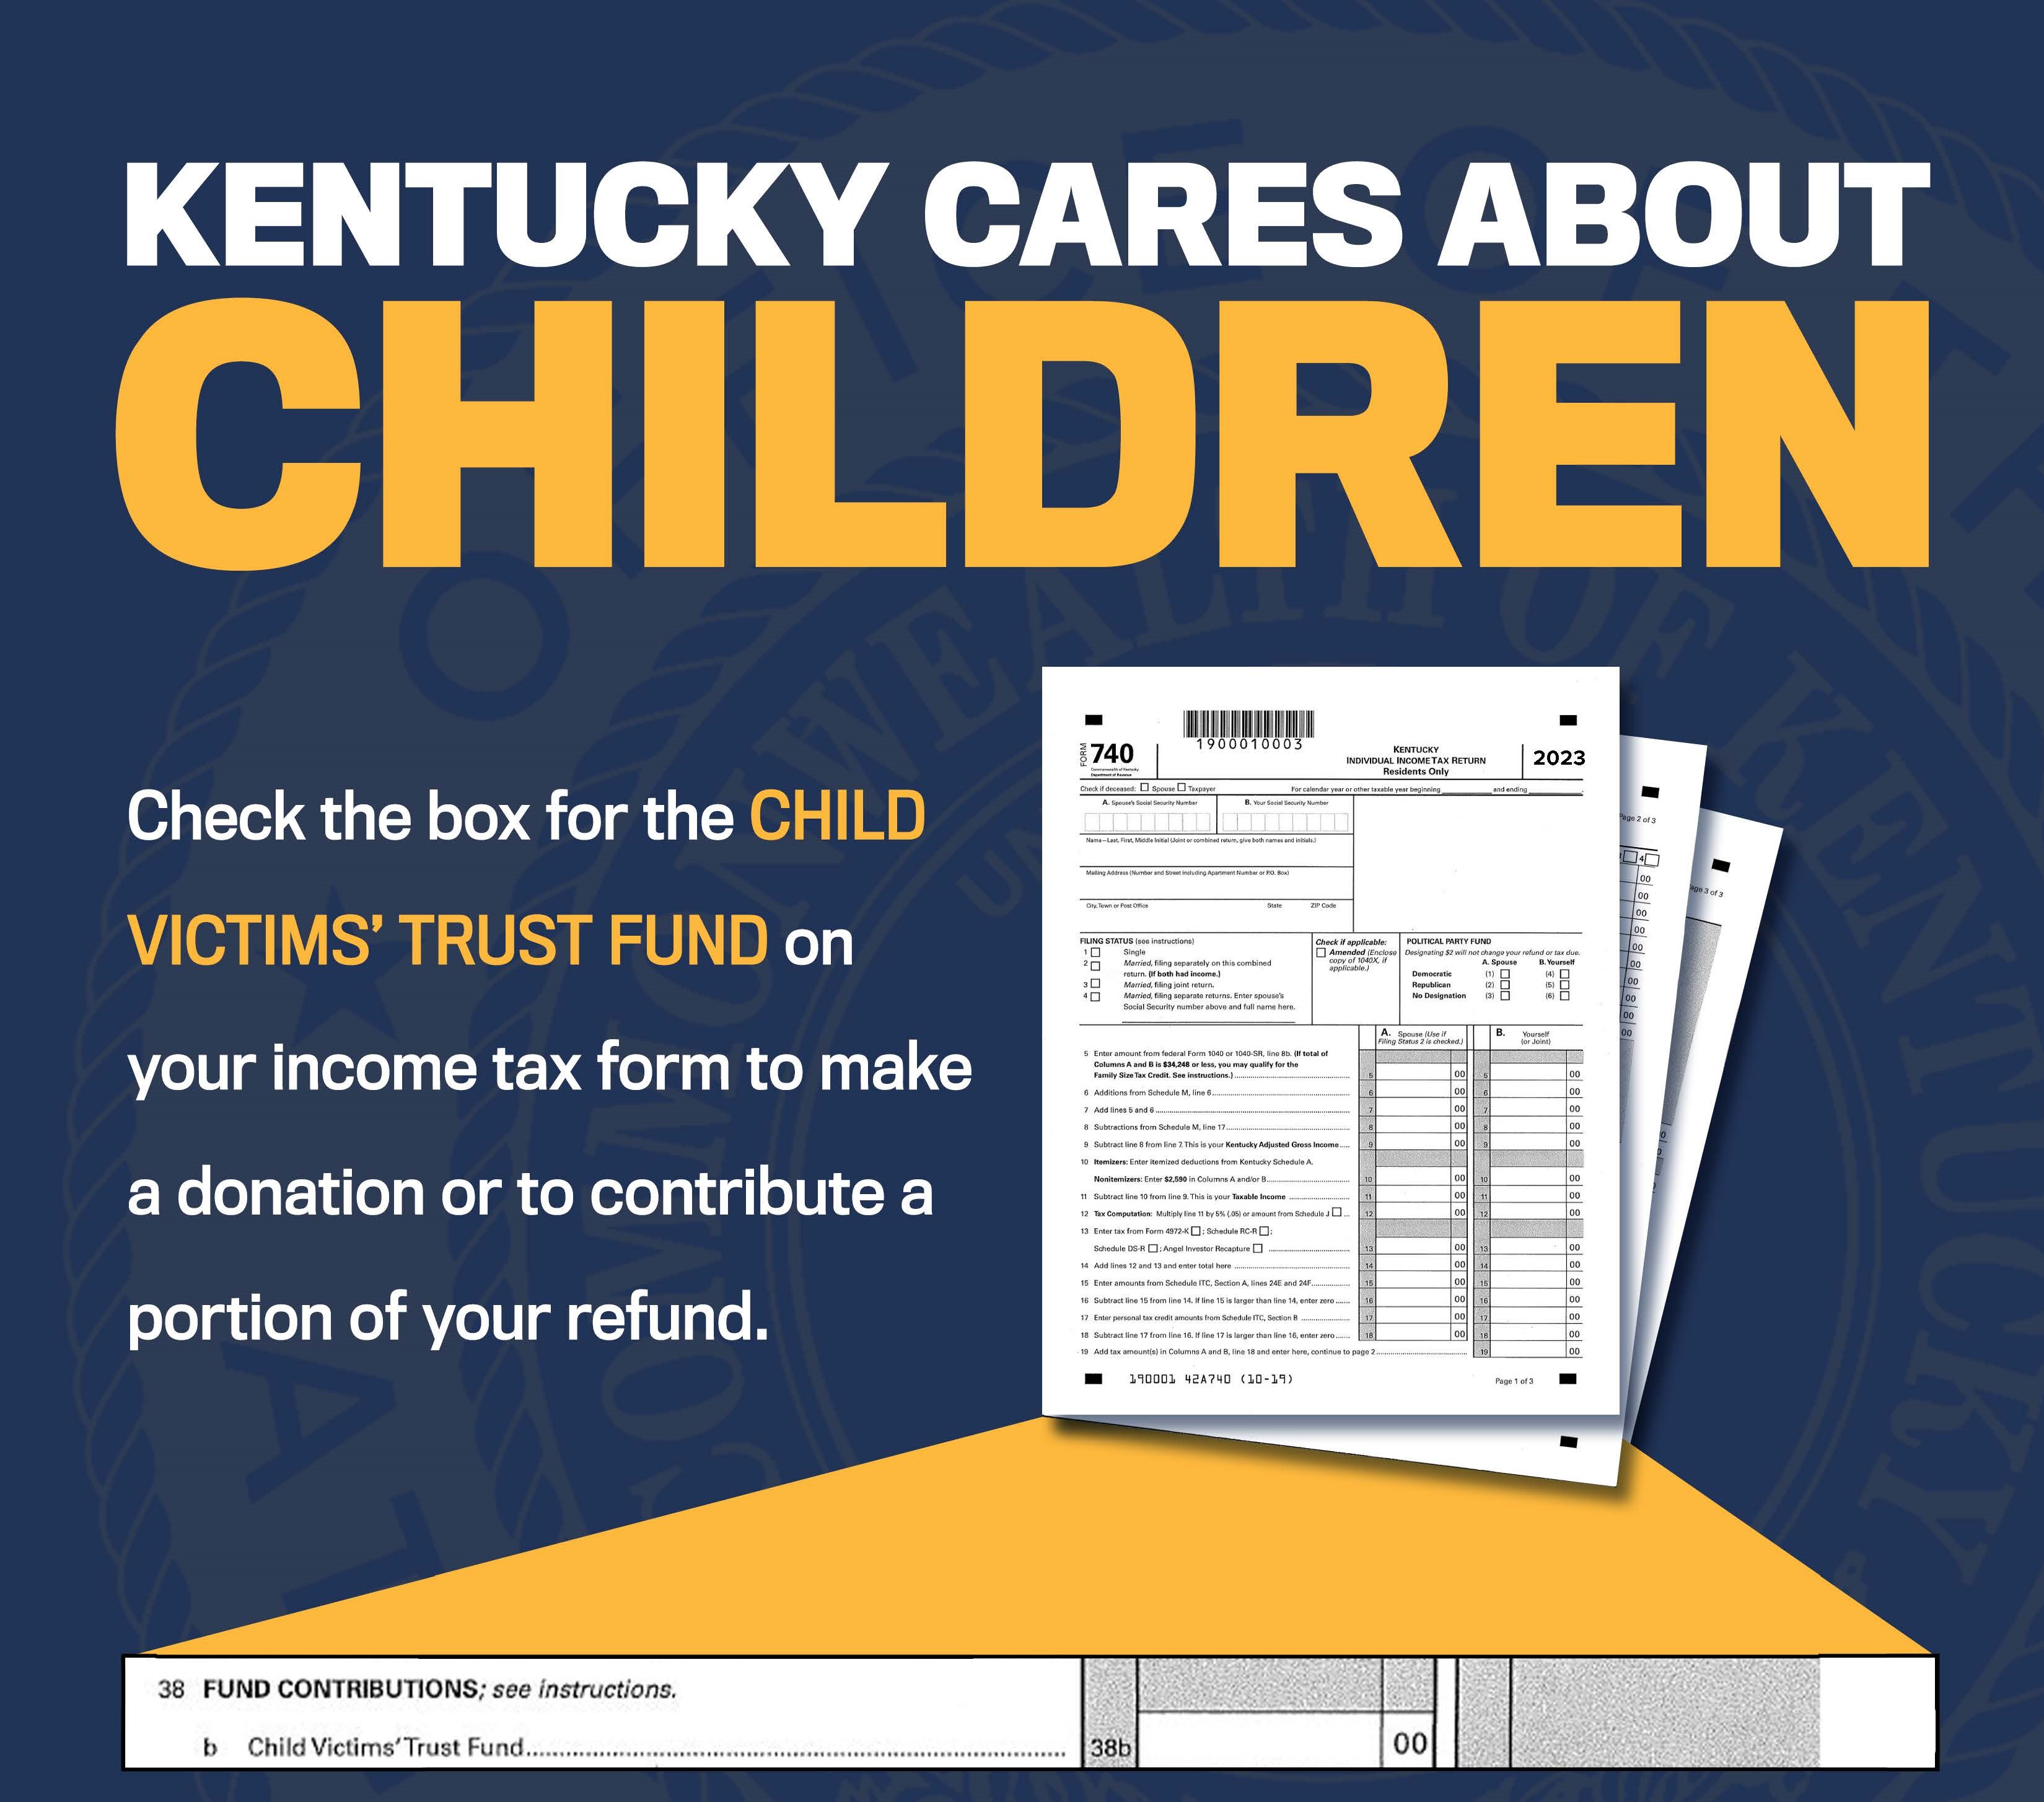 KENTUCKY CARES ABOUT CHILDREN Check the box for the CHILD VICTIMS TRUST FUND on your income tax form to make a donation or to contribute a portion of your refund. You can also contribute by making a direct donation at icareaboutkids.ky.gov, or by purchasing the I CARE ABOUT KIDS license plate. Ask your local County Clerk when renewing your vehicle tags The Kentucky Child Victims Trust Fund (CVTF) provides funding for child sexual abuse prevention programs that utilize innovative strategies to provide children with personal safety skills, teach adults how to keep children safe from child abuse and exploitation, and inform the public about the mandatory reporting of suspected child abuse. The CVTF also provides partial reimbursement for child sexual abuse medical exams at children's advocacy centers across the state. For more information, call the Office of Attorney General Daniel Cameron at (502) 696-5300 or visit icareaboutkids.ky.gov.